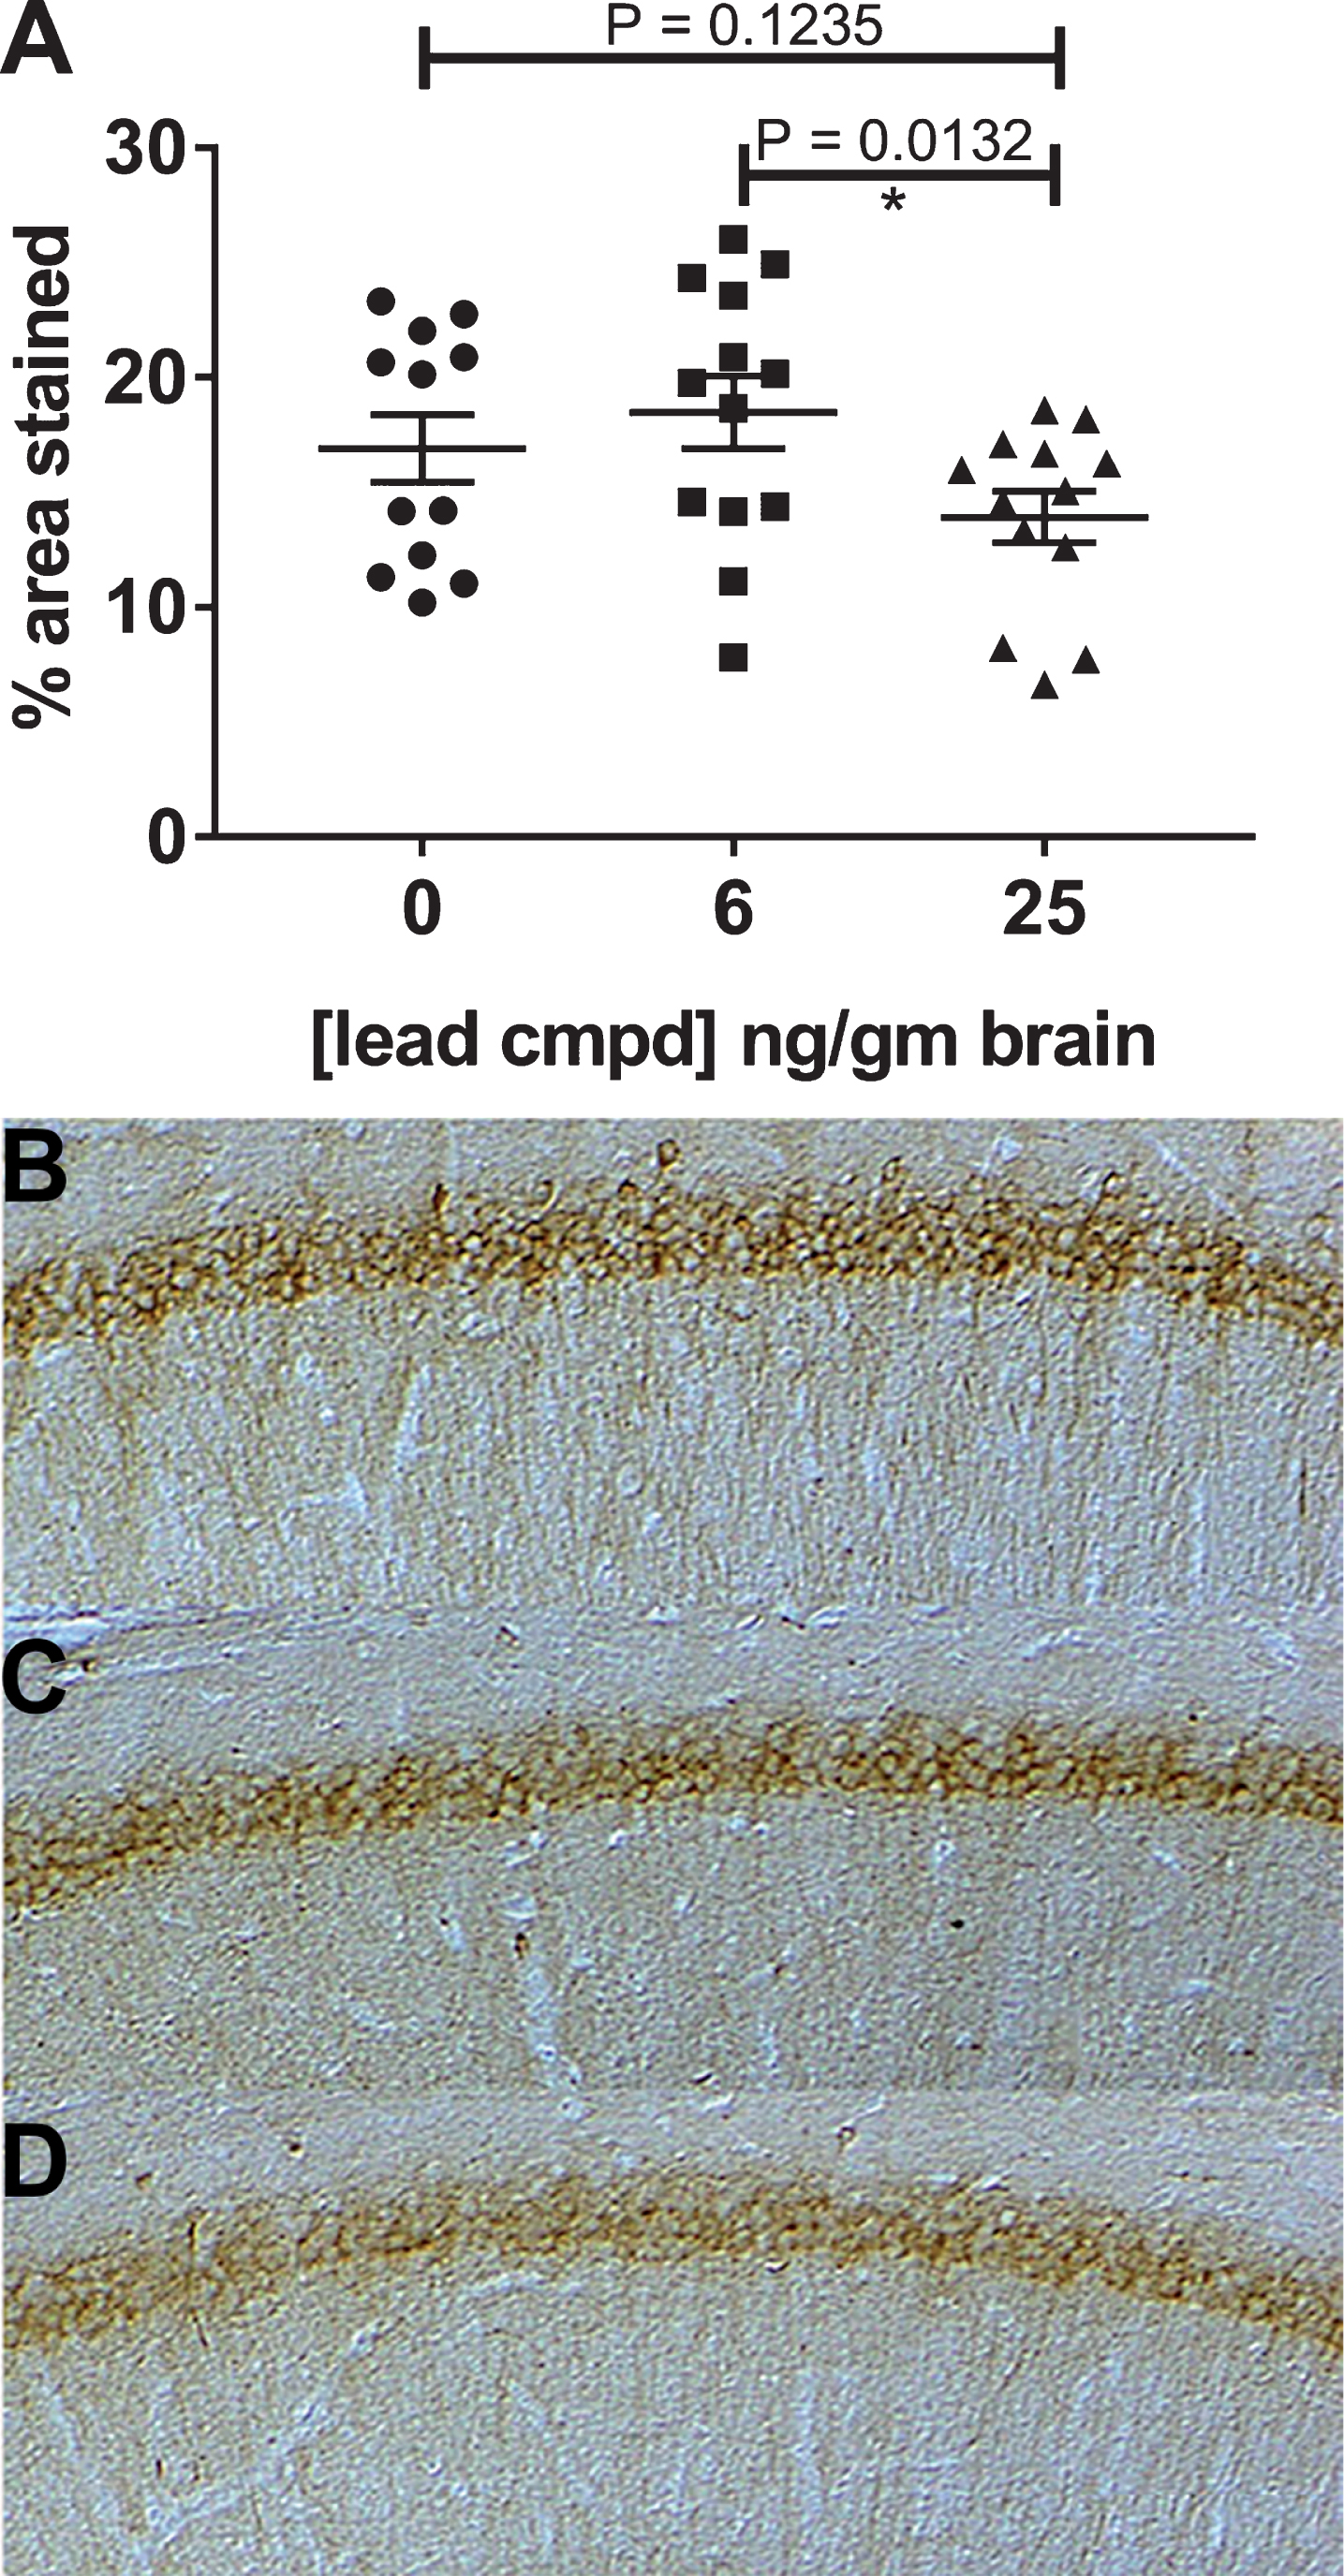 Immunohistochemistry of hippocampal slices of male mice. The mAb MC1, recognizing misfolded pathological tau, was used to stain the hippocampal slices from each mouse. Treated mice with 25 ng compound/g brain had significantly reduced levels of MC1 dependent pathological tau compared to treated mice with 6 ng compound/g brain (A). Representative images of the hippocampal region stained with mAb MC1 are shown for the vehicle control (B) and treatment groups 6 and 25 ng/gm brain (C, D).